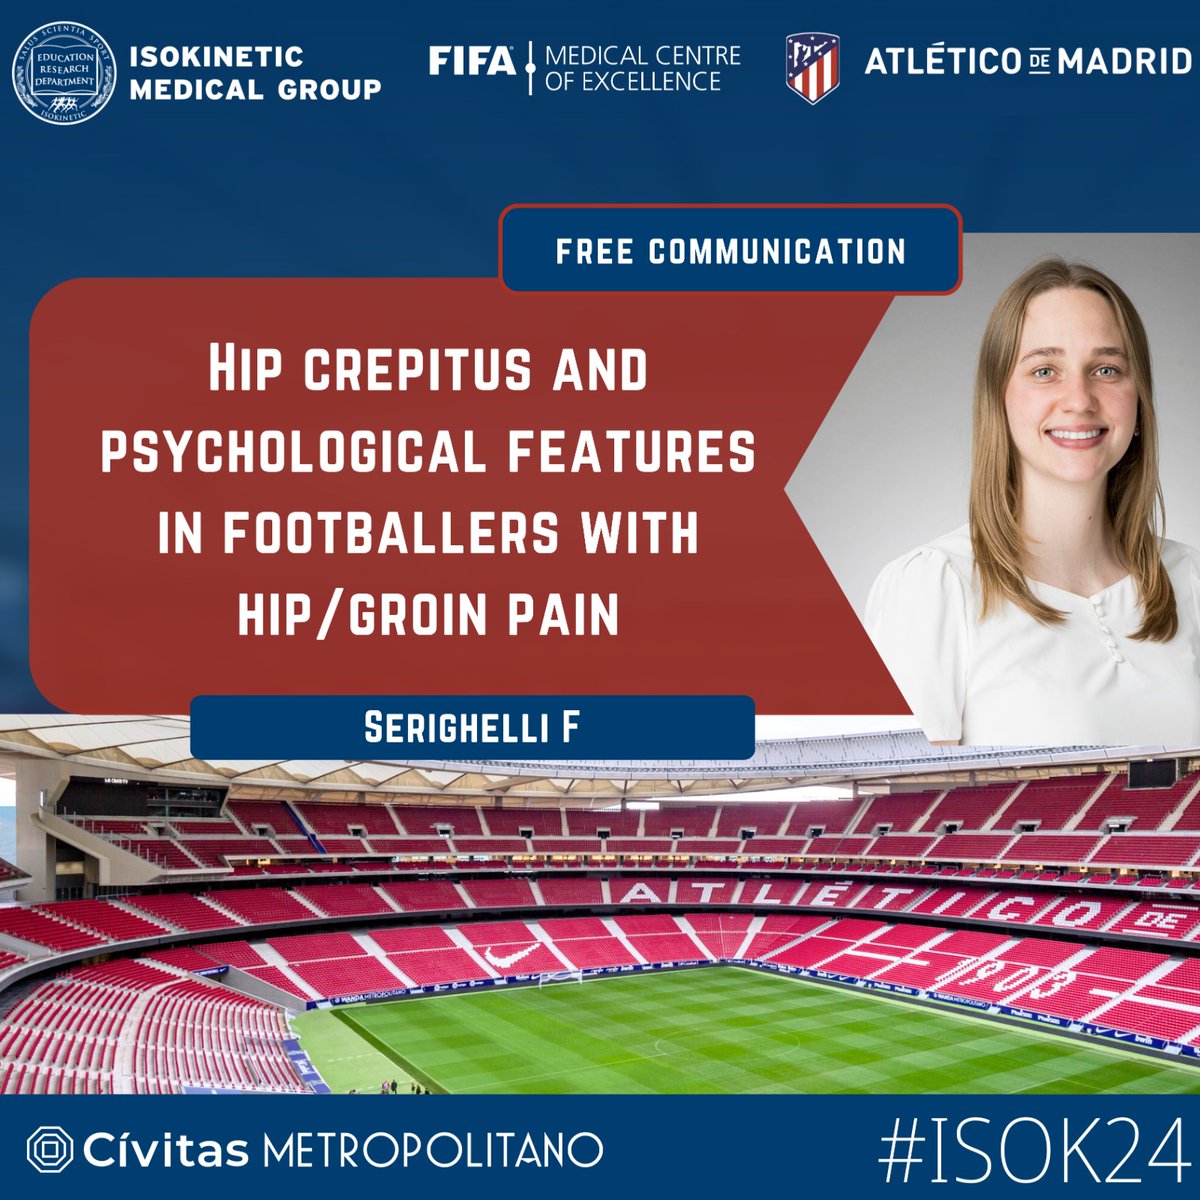 Happy and looking forward to presenting this amazing work together with @JHeerey @MarkScholes85 @JoanneLKemp @FAI_Cohort and brilliantly supervised by @DrDanilo_Silva @kaymcrossley @MattKing_Physio in the @footballmed in Madrid!